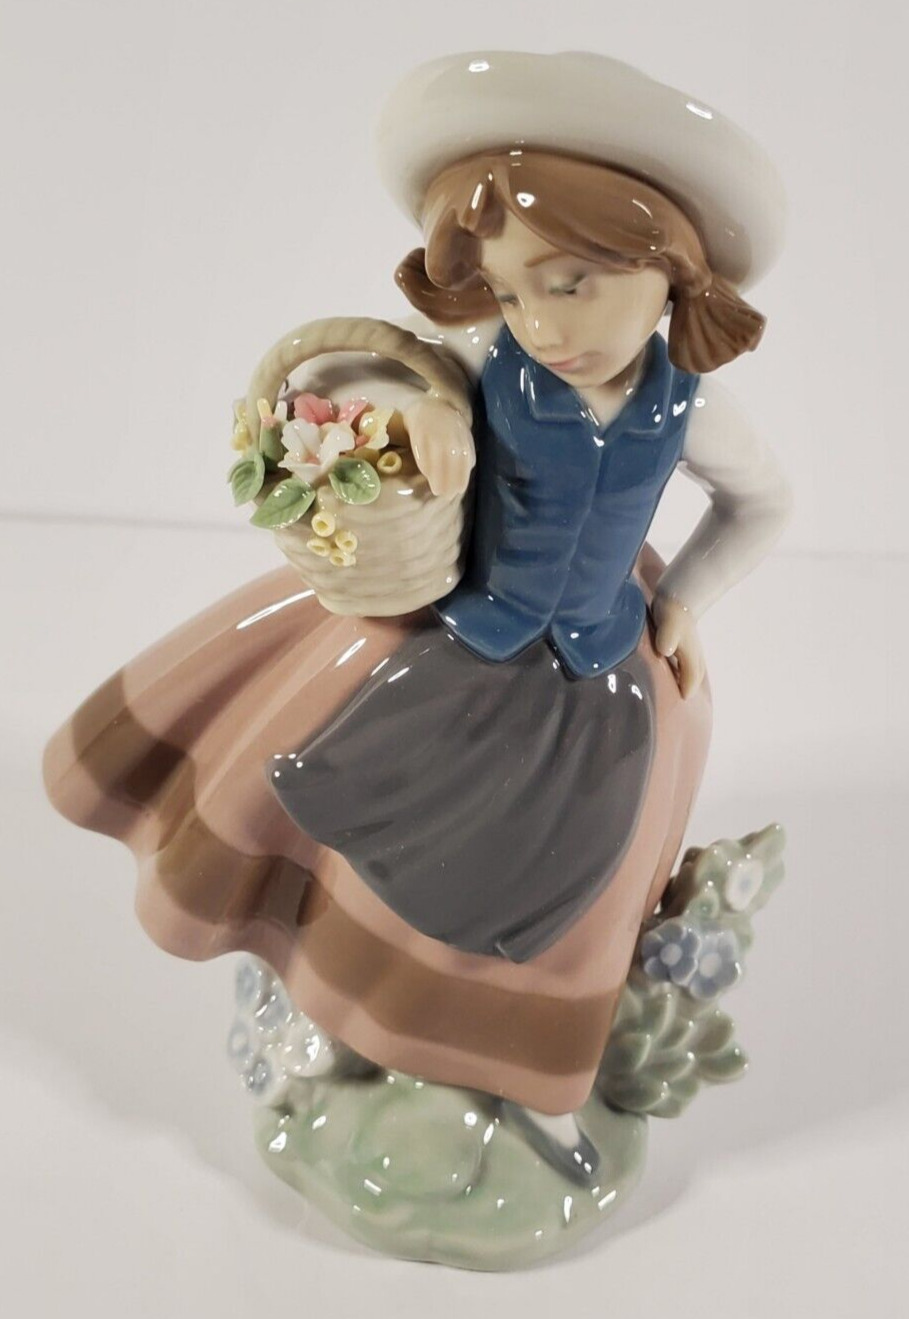 Mint LLADRO Sweet Scent Girl With Basket of Flowers #05221 Hand-painted Spain